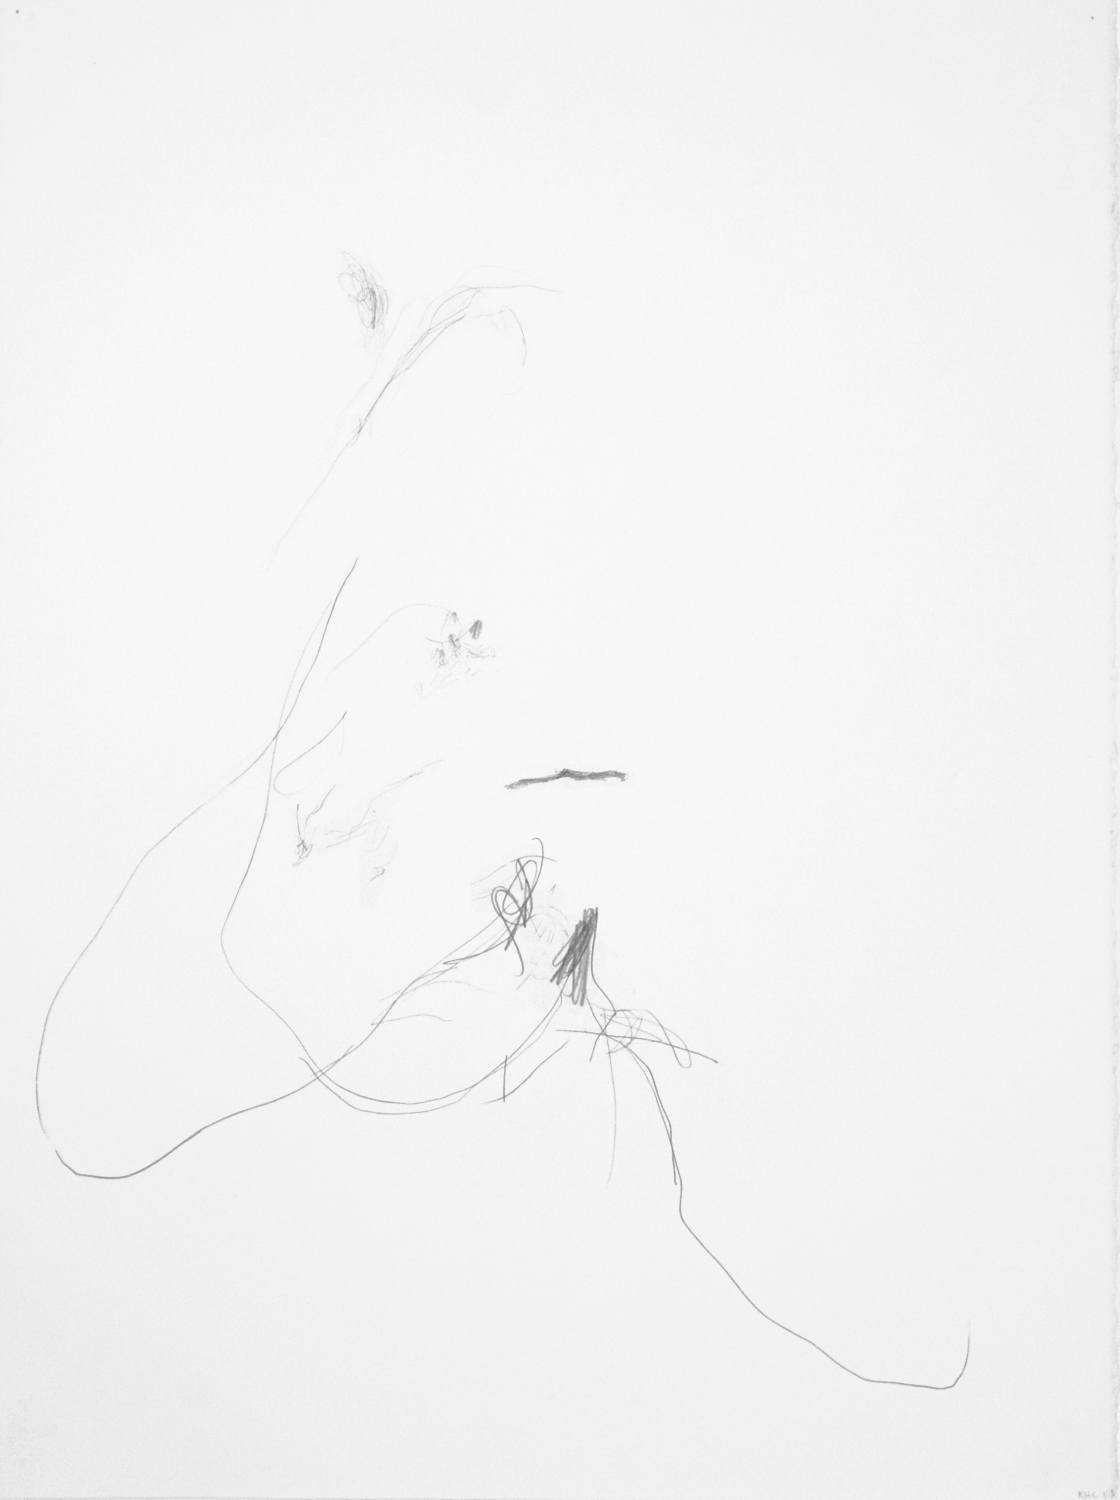  Untitled, 2013. 30" x 22", pencil on paper. 